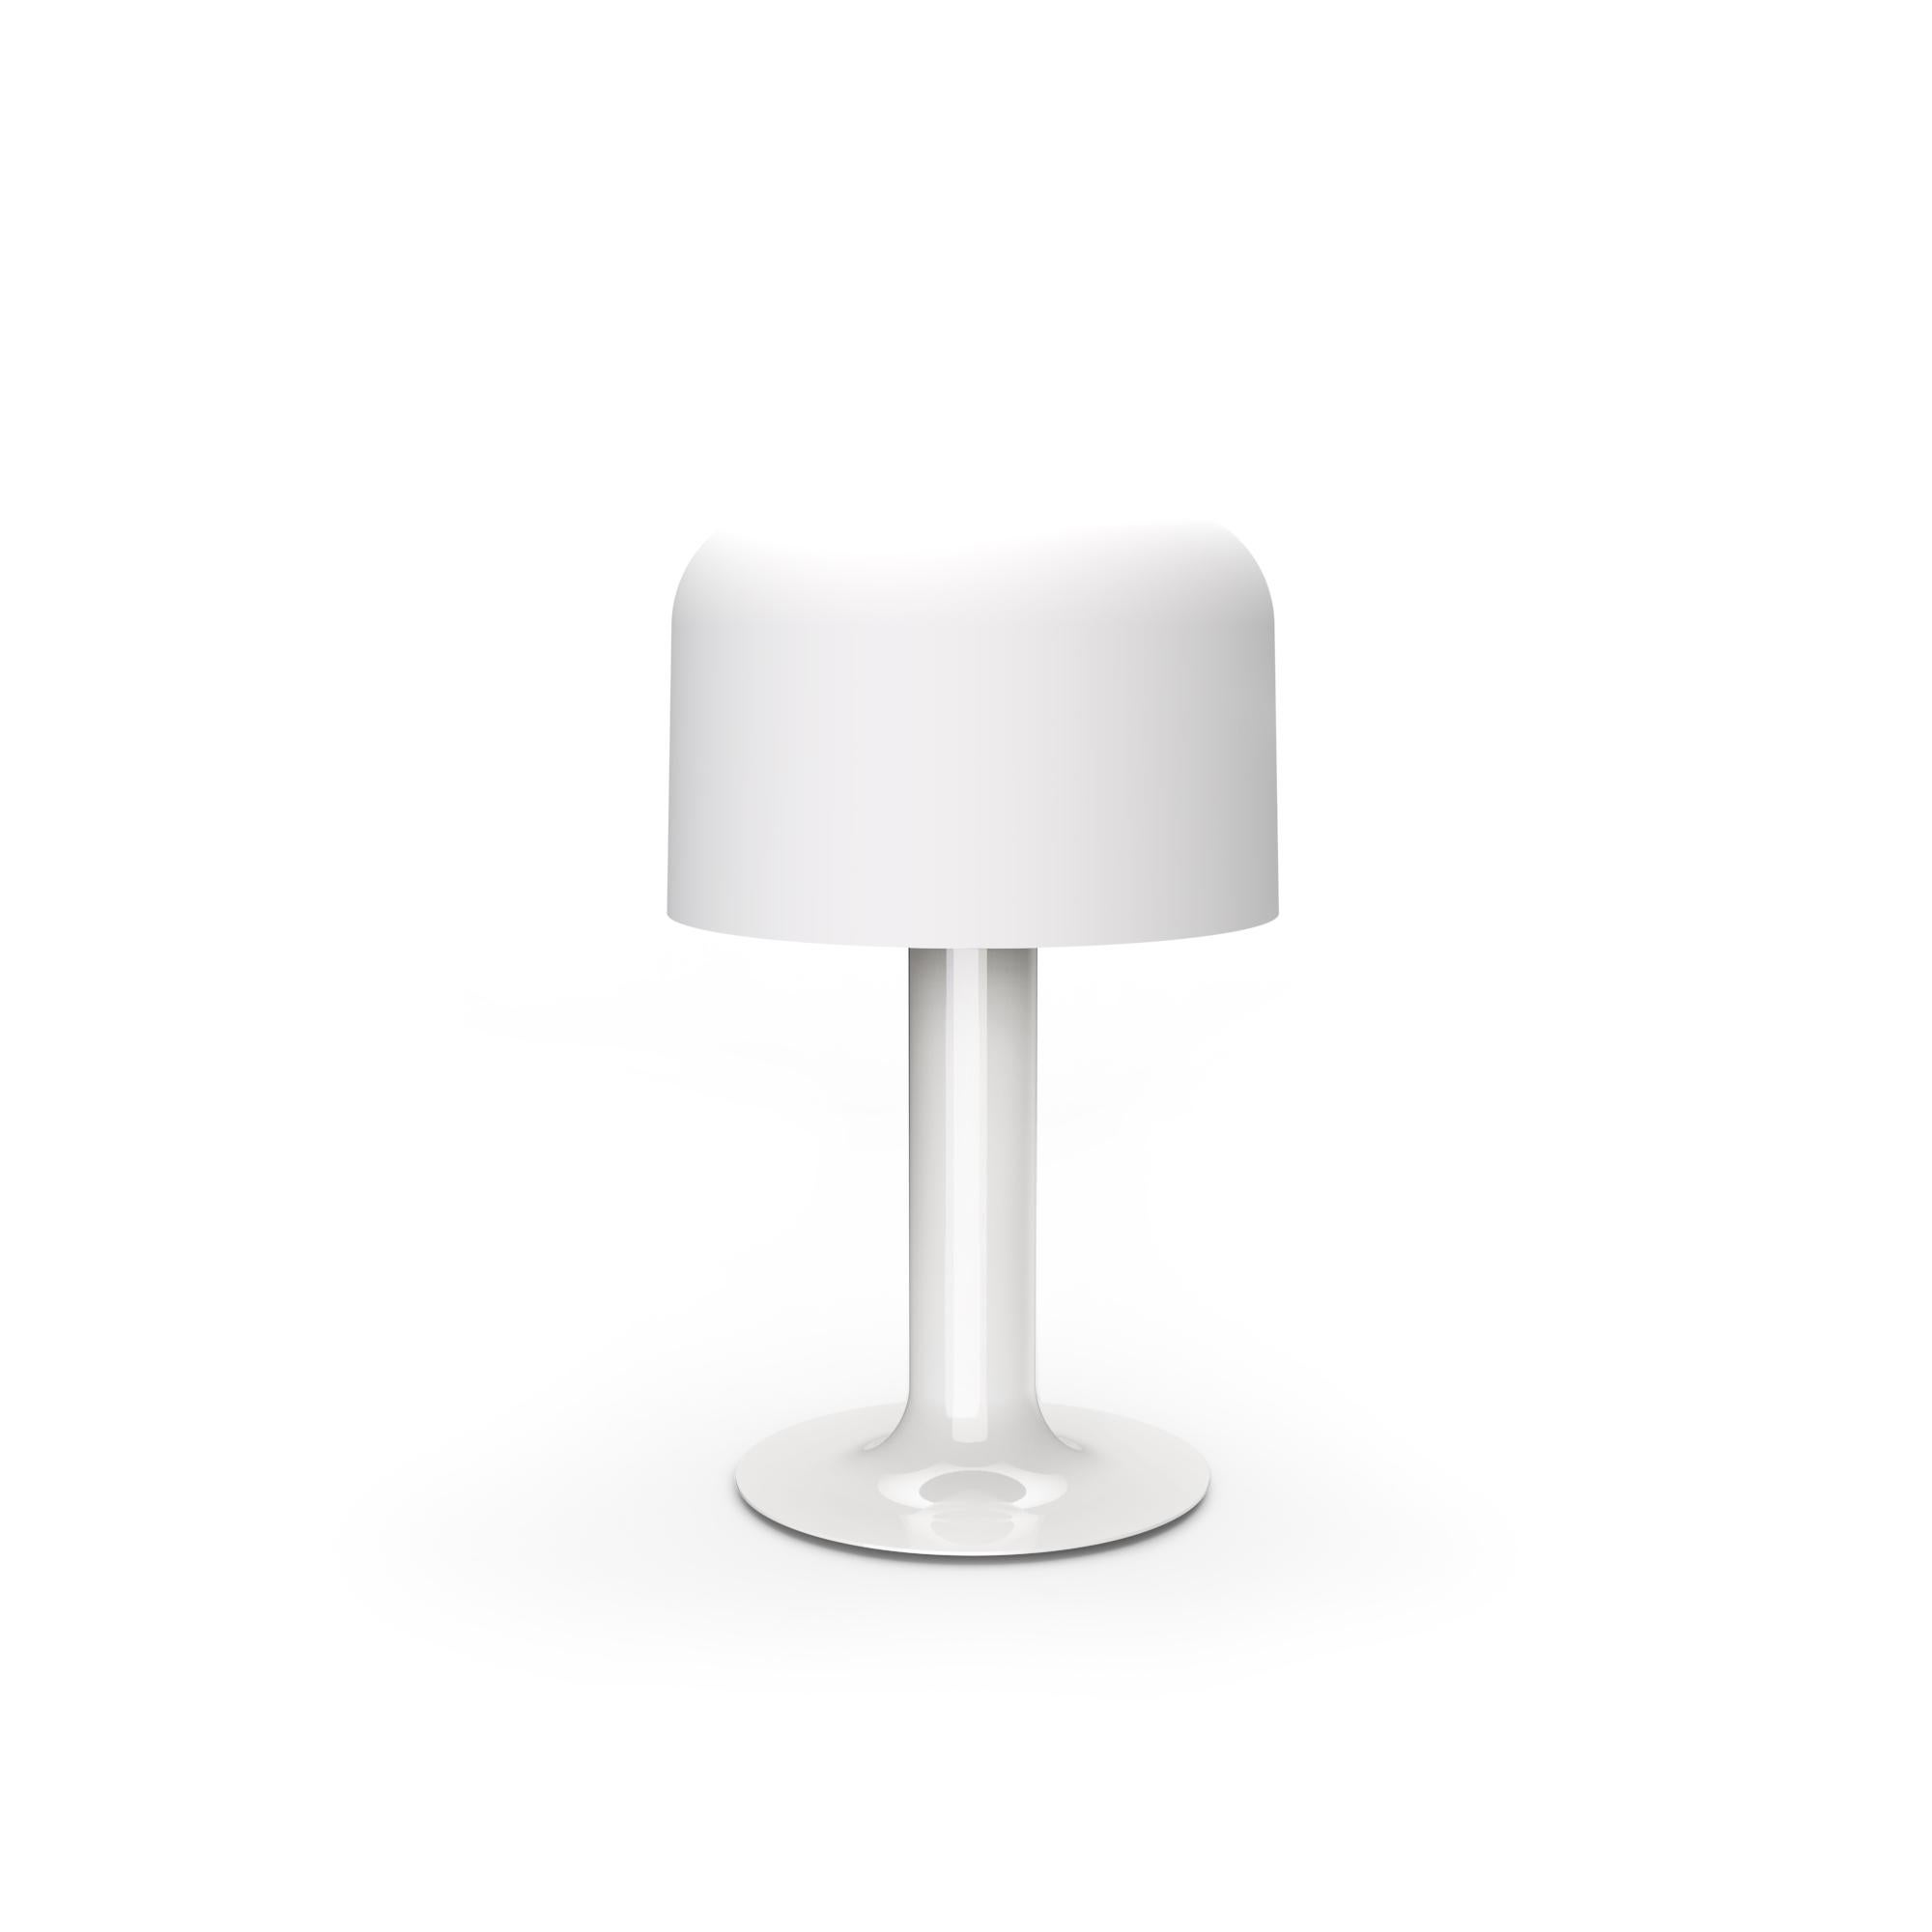 Michel Mortier 10497 metal and glass table lamp for Disderot in white.

Originally designed in 1972, this sculptural table lamp is a newly produced numbered edition with an authentication certificate. Made in France by Disderot with many of the